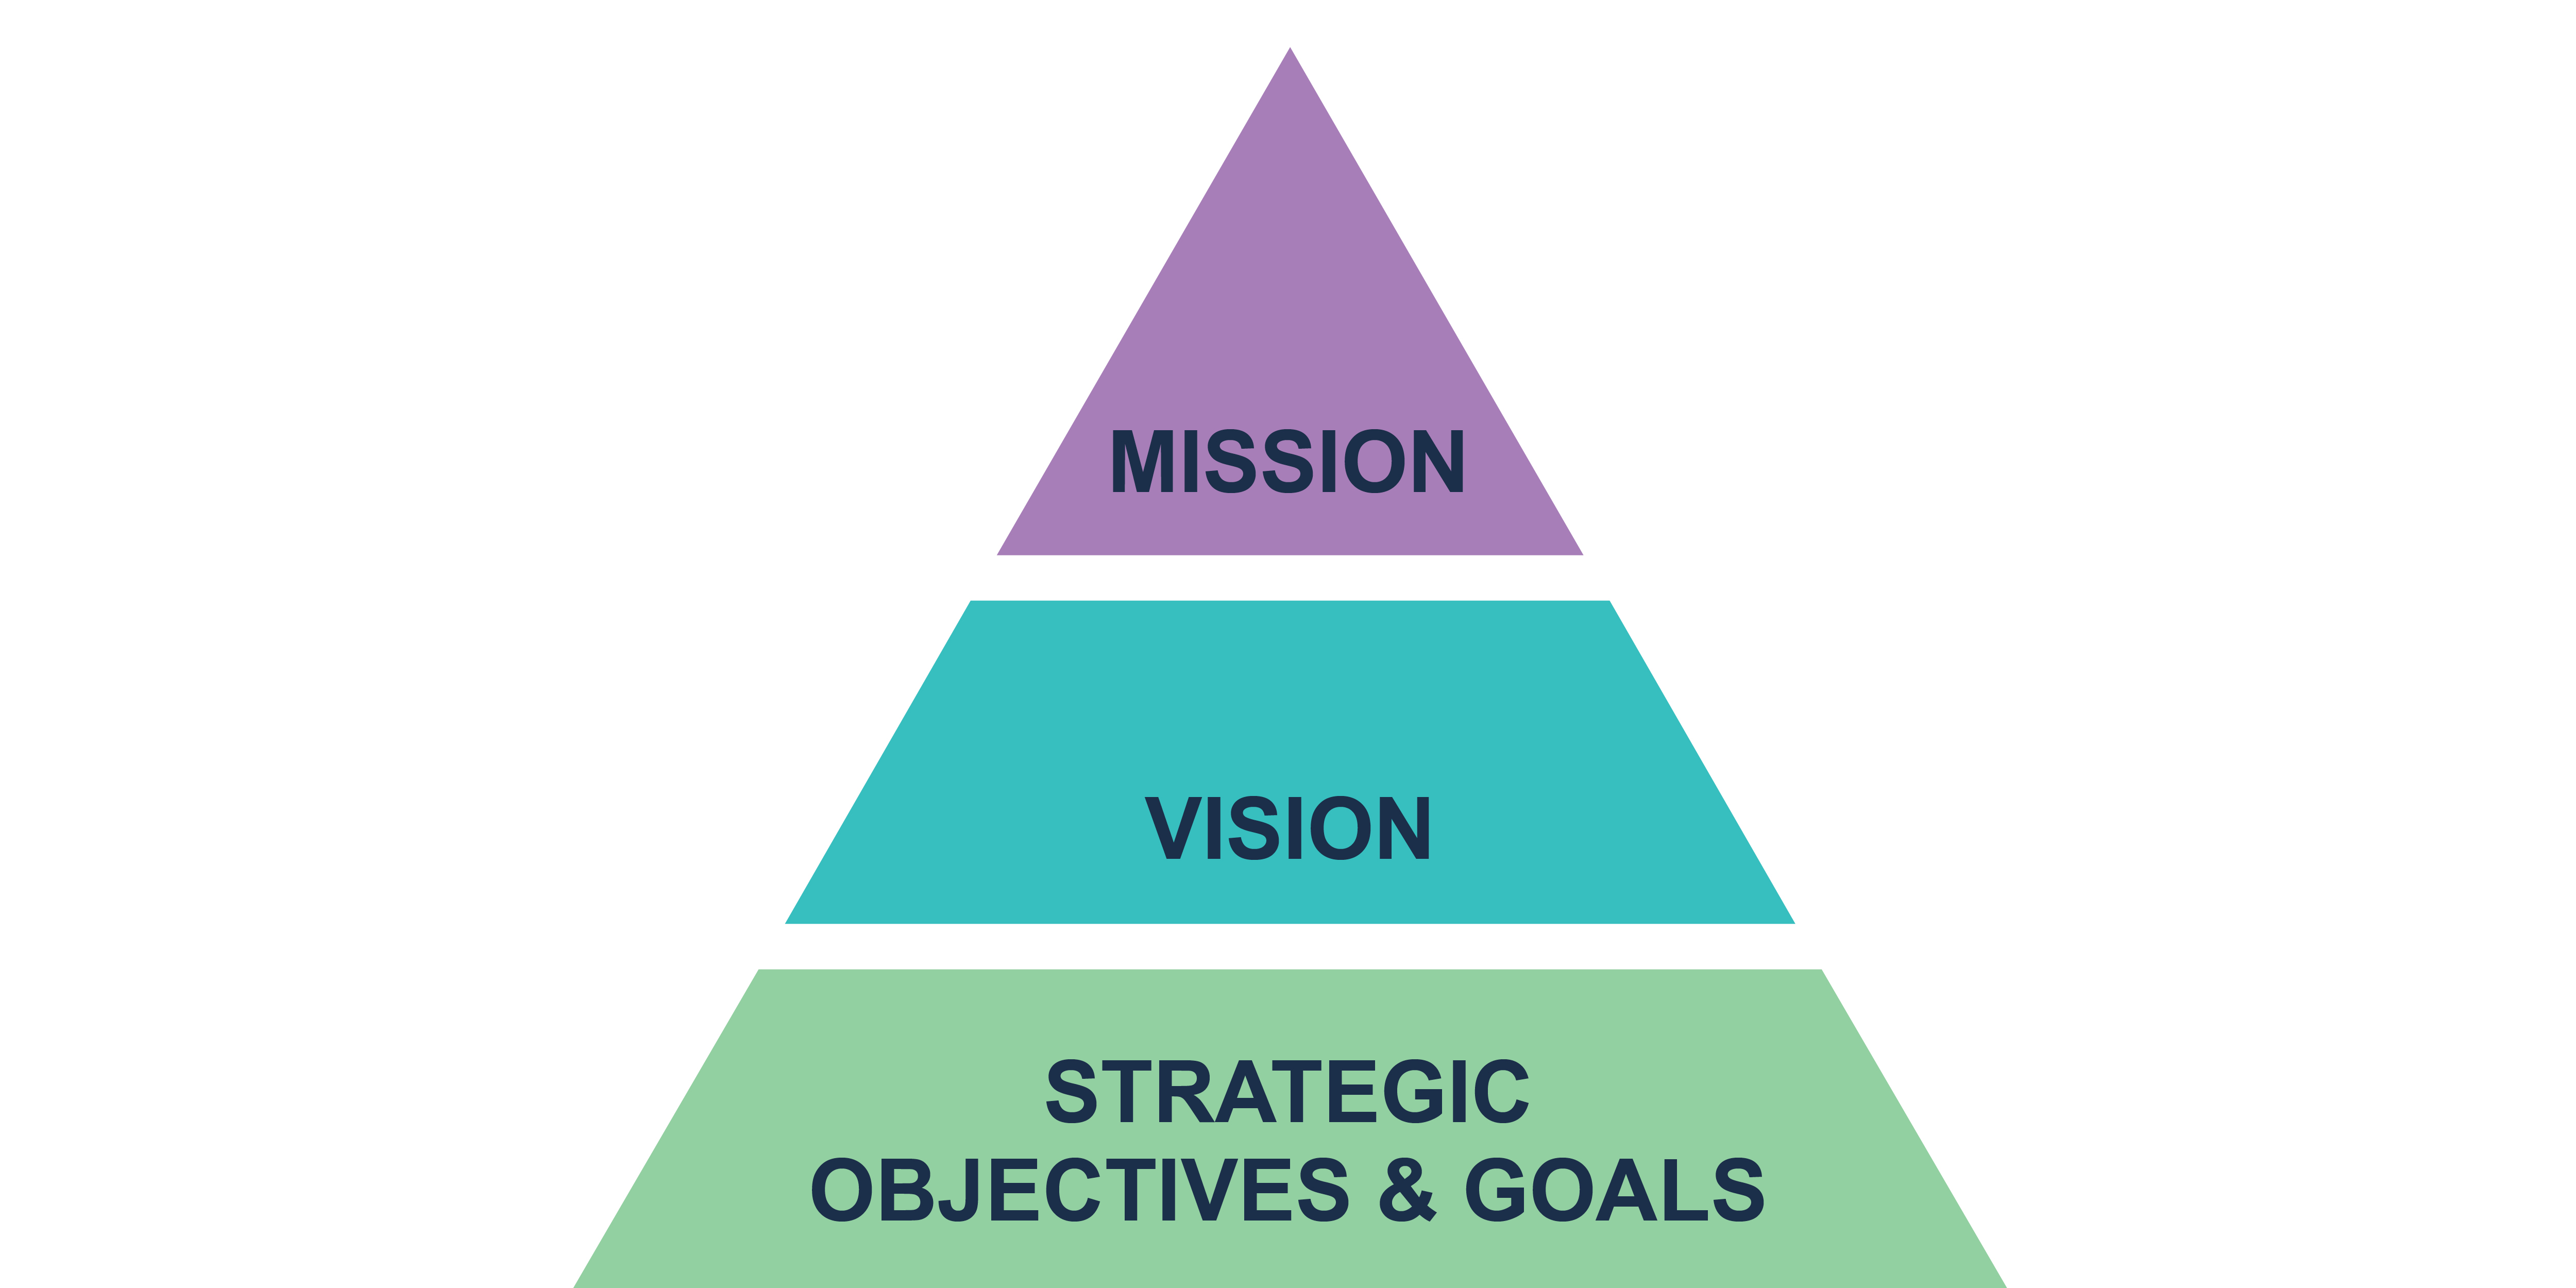 The ICANN Strategic Plan consists of ICANN's mission, vision, and strategic objectives and goals.